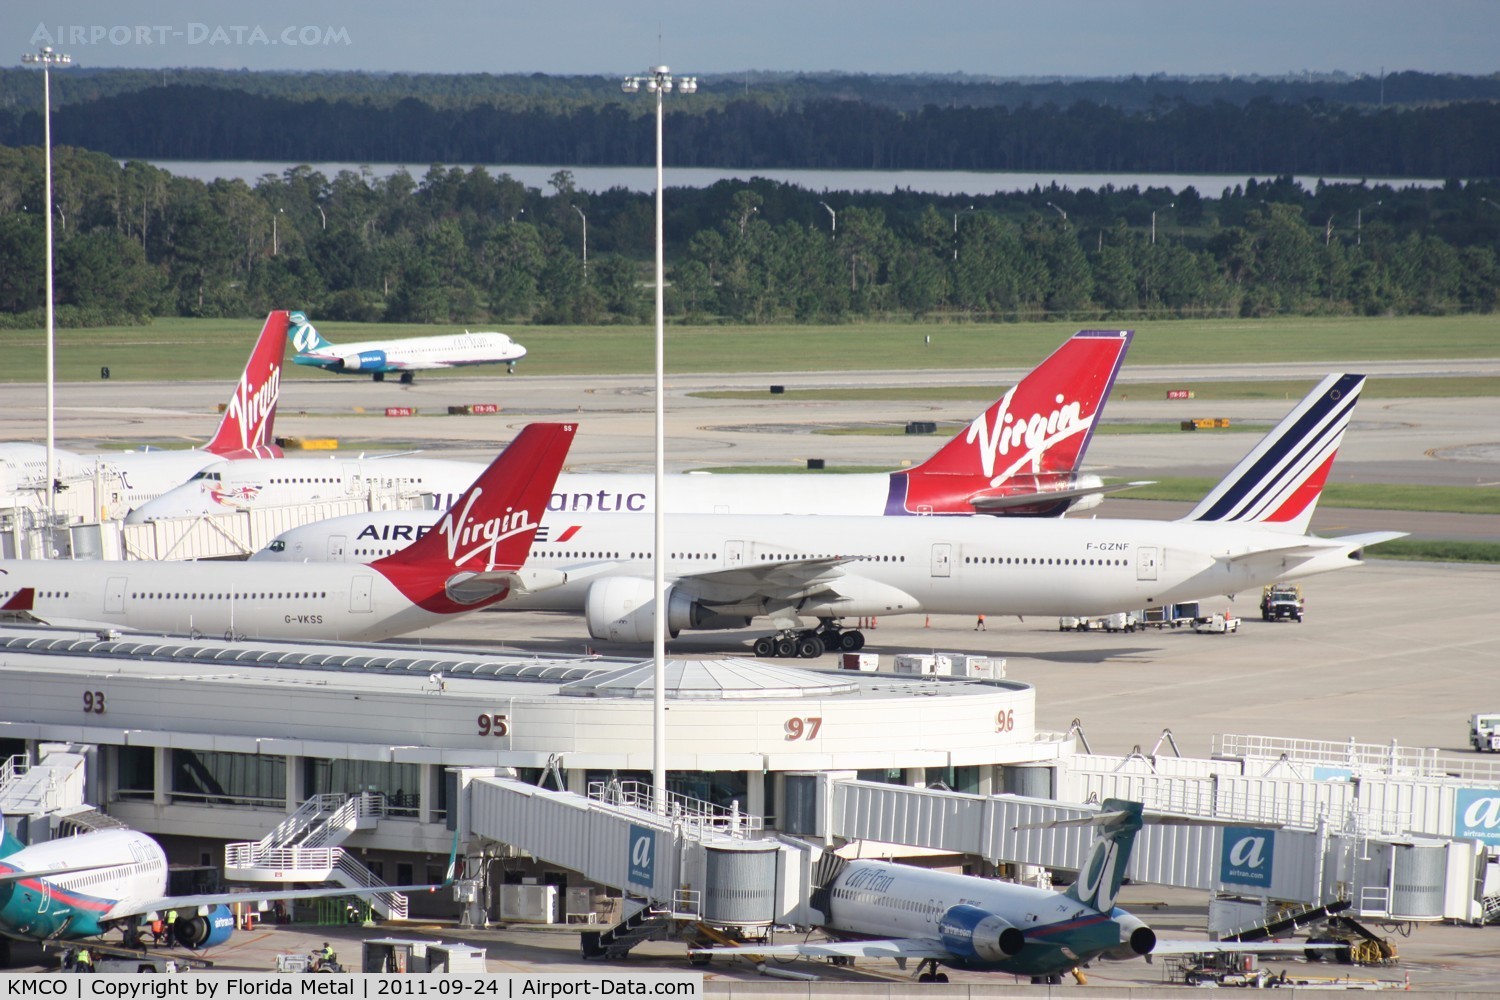 Orlando International Airport (MCO) - Busy Saturday at MCO - all international gates occupied - Gate 81 - Virgin A330, 83 - Air France 777, 85 -Virgin 747, 87 - Virgin 747 84 (not pictured) Lufthansa A340-600, 82 (not pictured) Virgin A330, 80 (not pictured) British 777